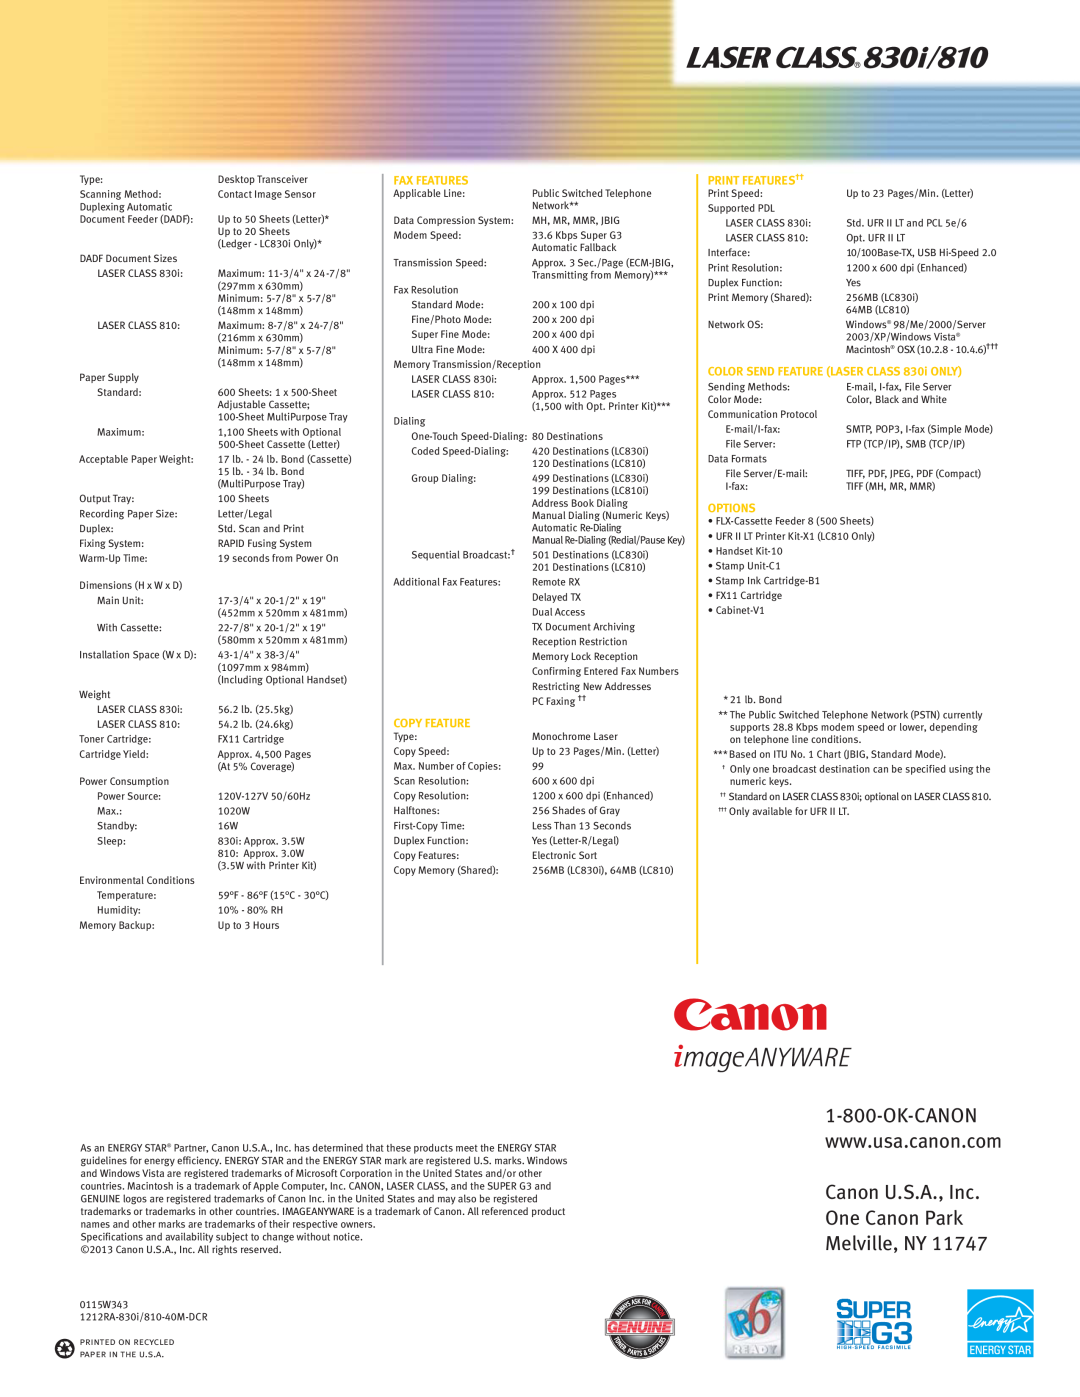 Canon 810, 830I manual Fax Features, Copy Feature, Print Features††, COLOR SEND FEATURE LASER CLASS 830i ONLY, Options 